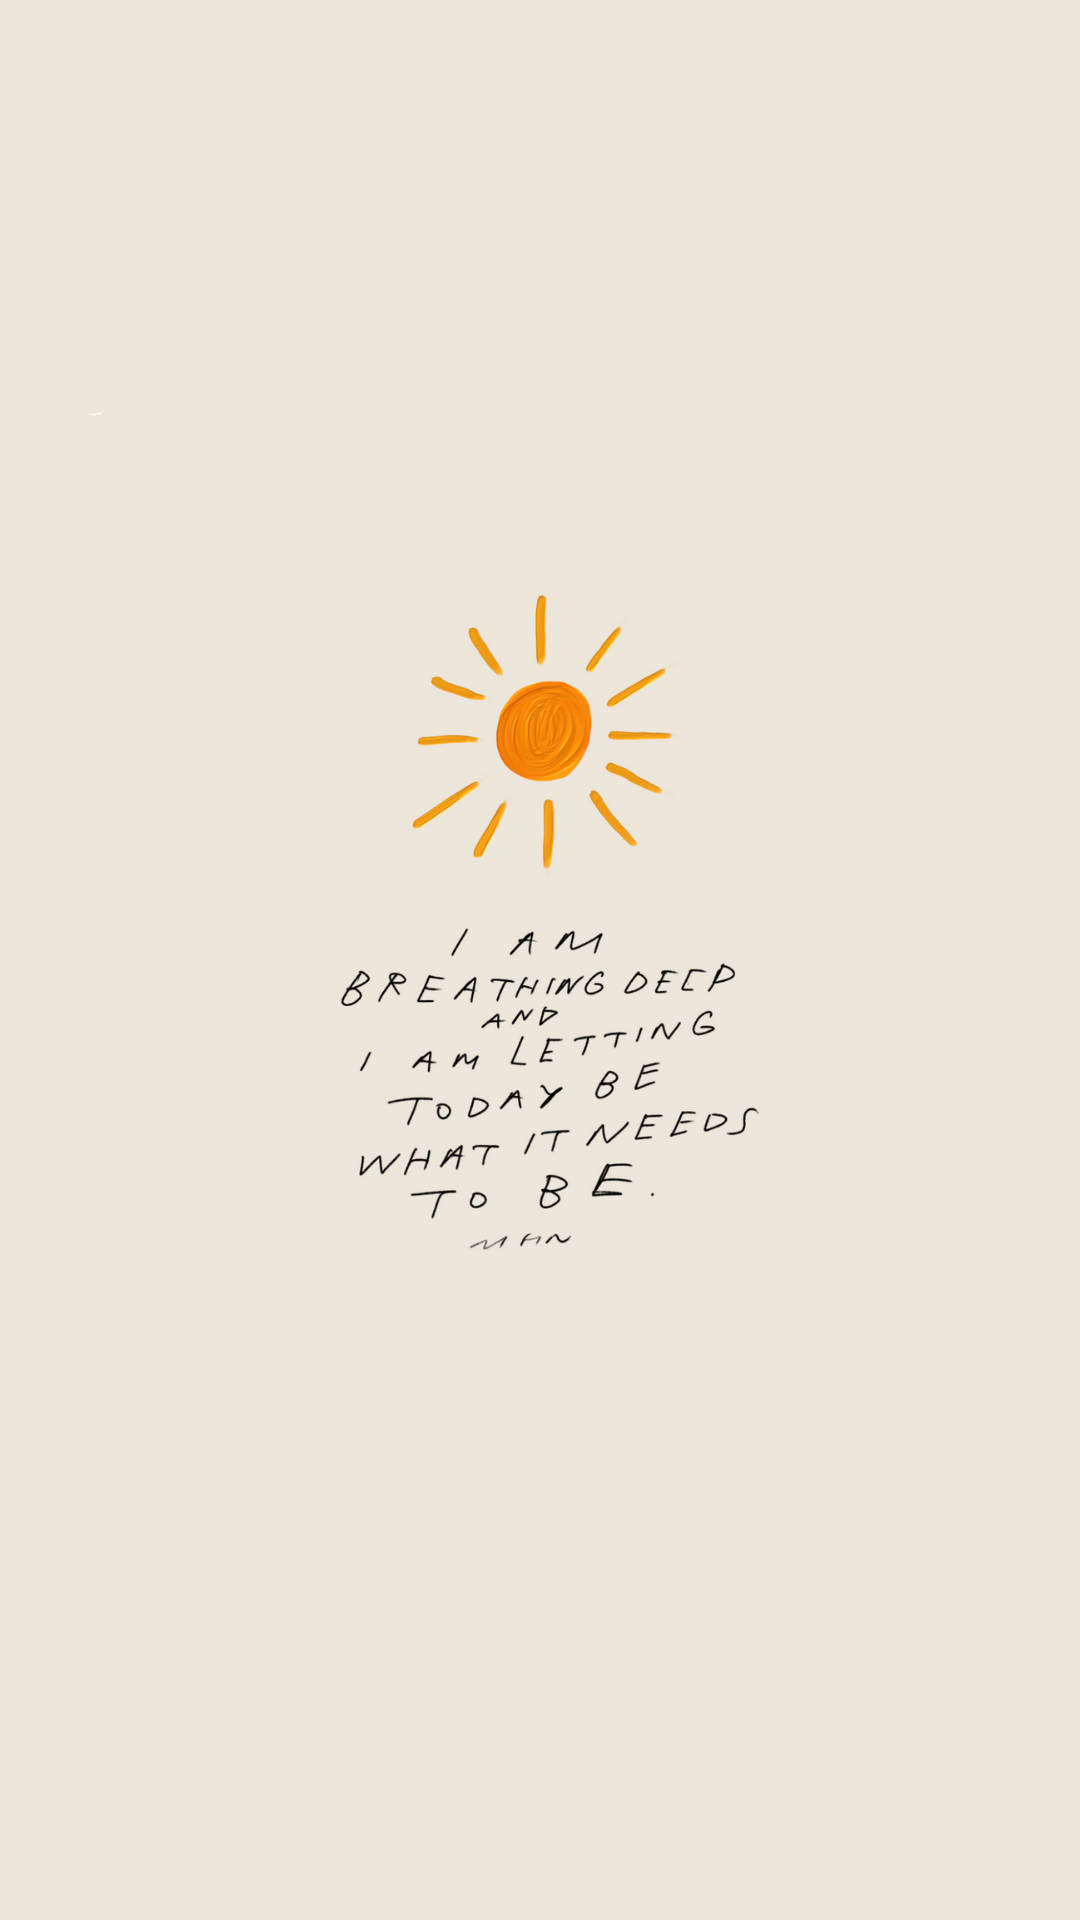 Affirmation With Painted Sun Background